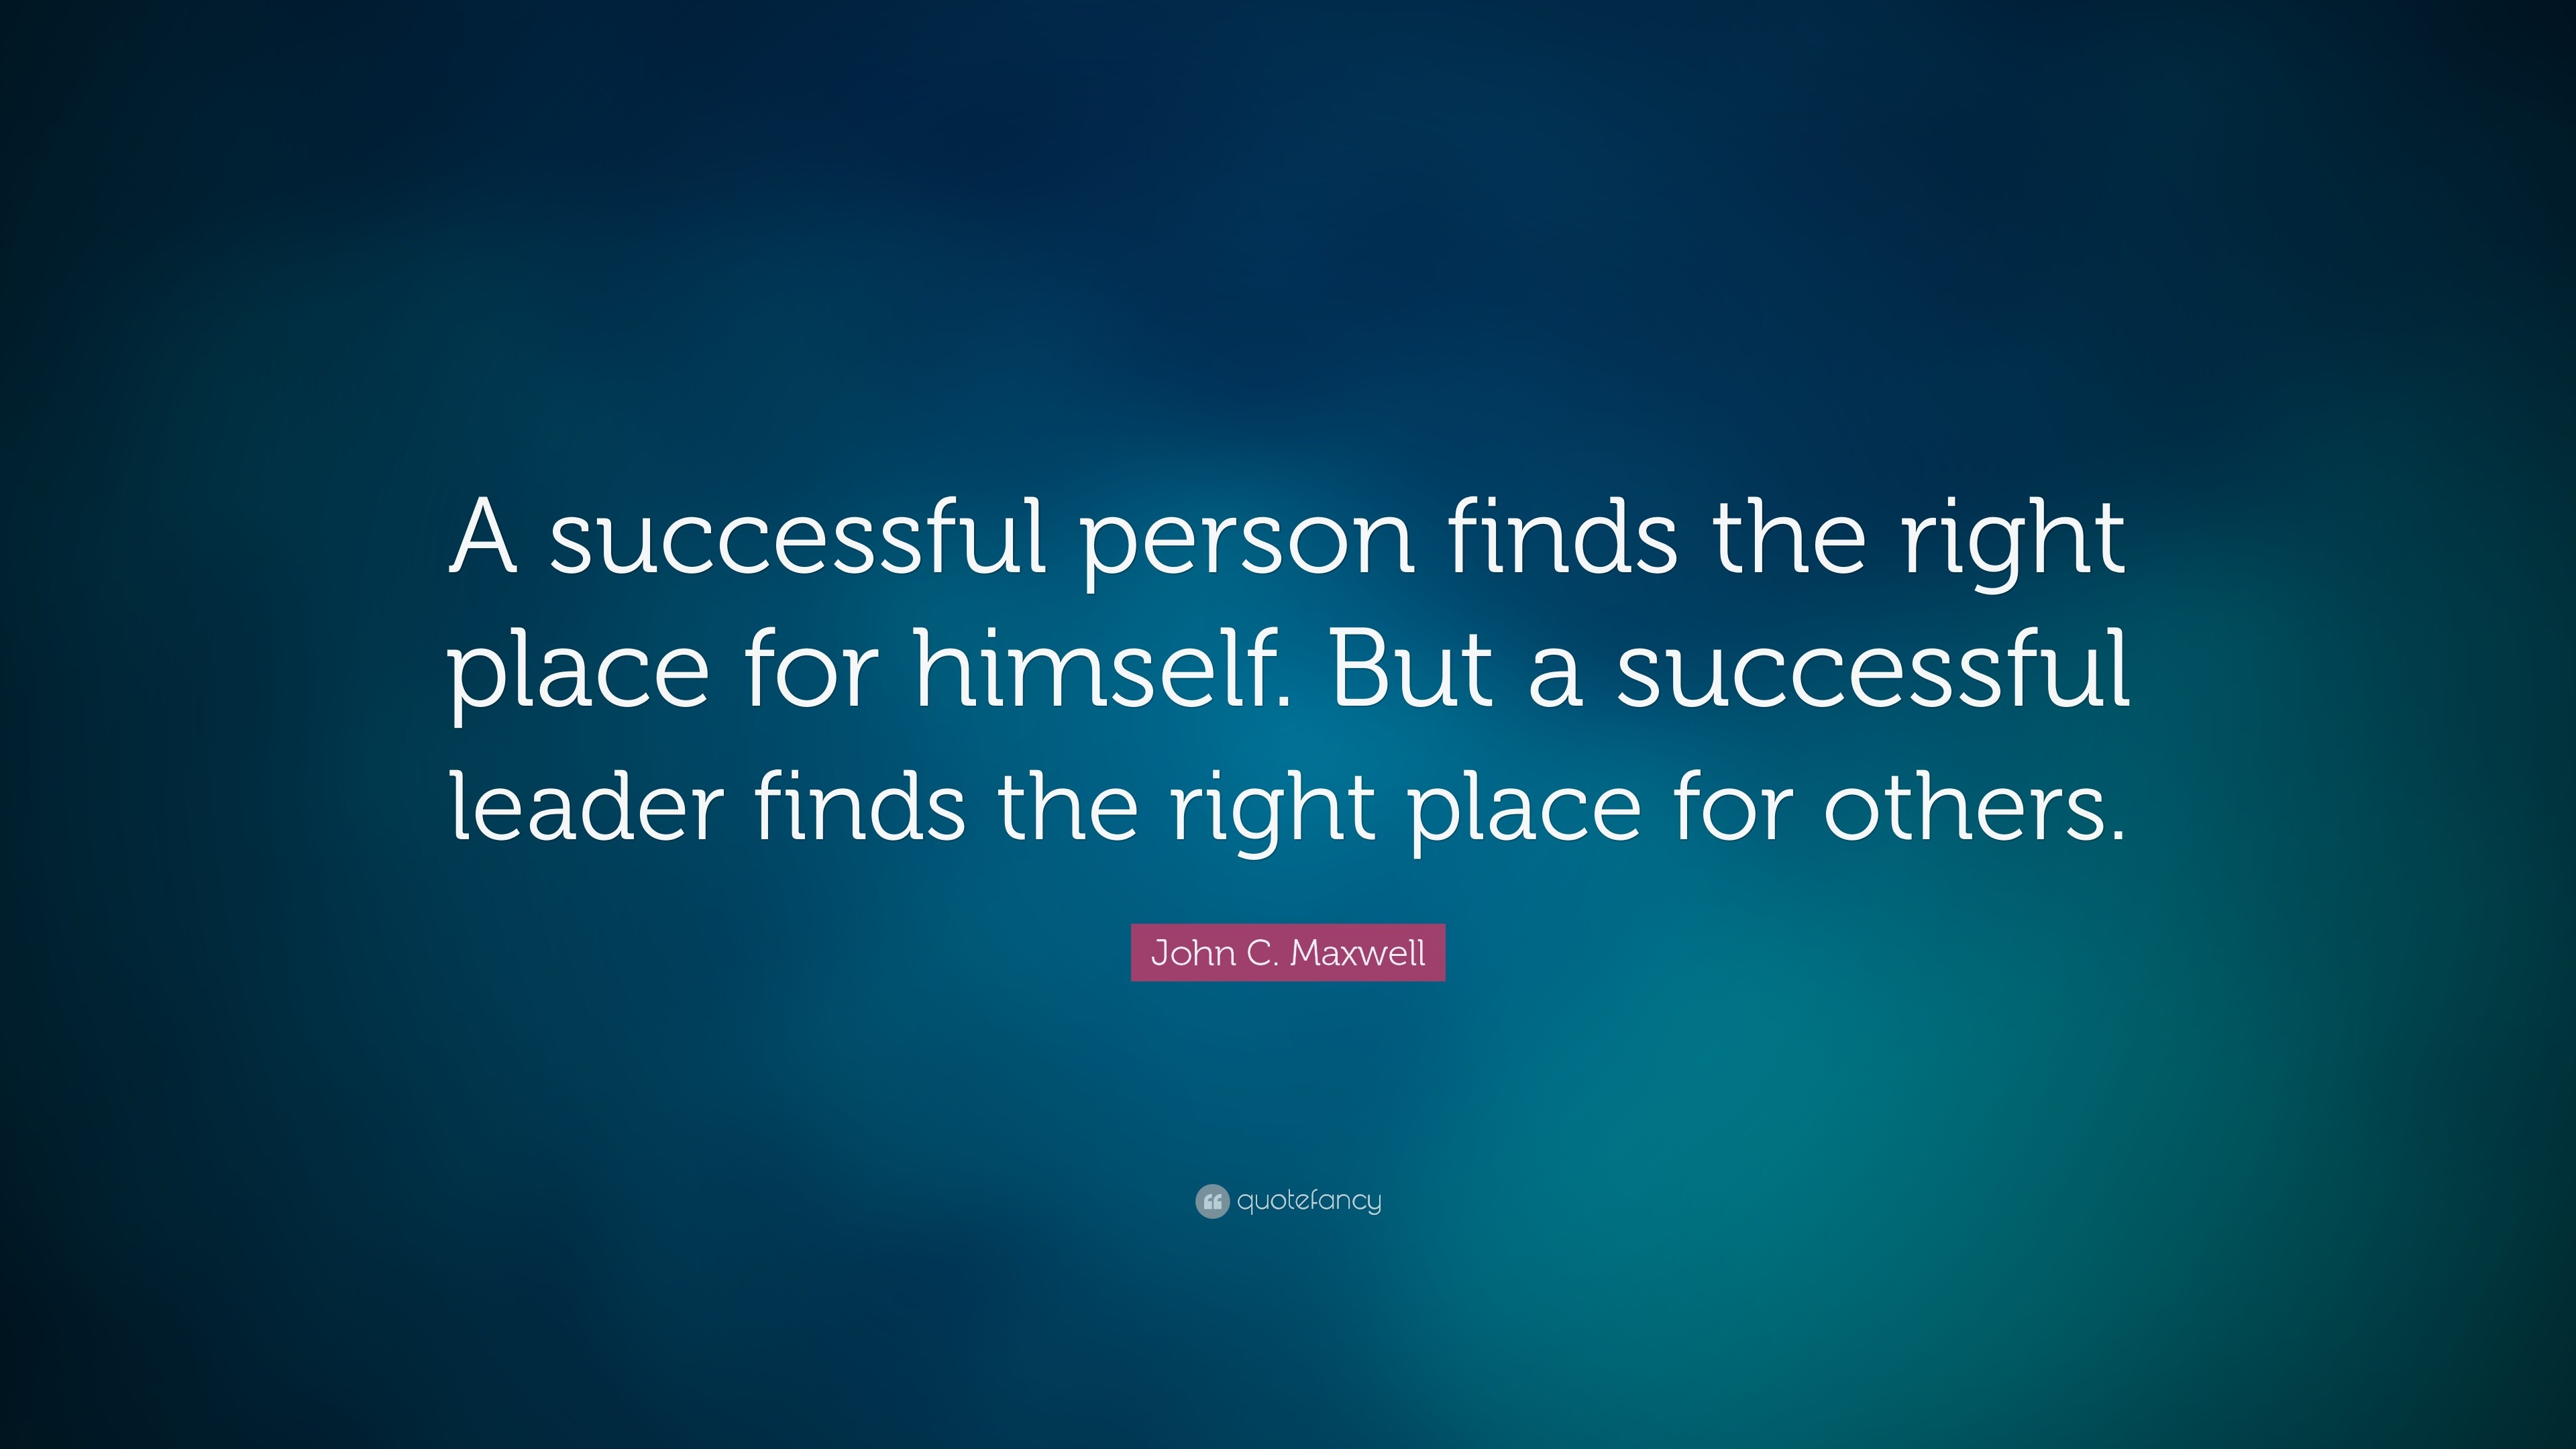 3840x2160 Leadership Quotes: “A successful person finds the right place for himself.  But a